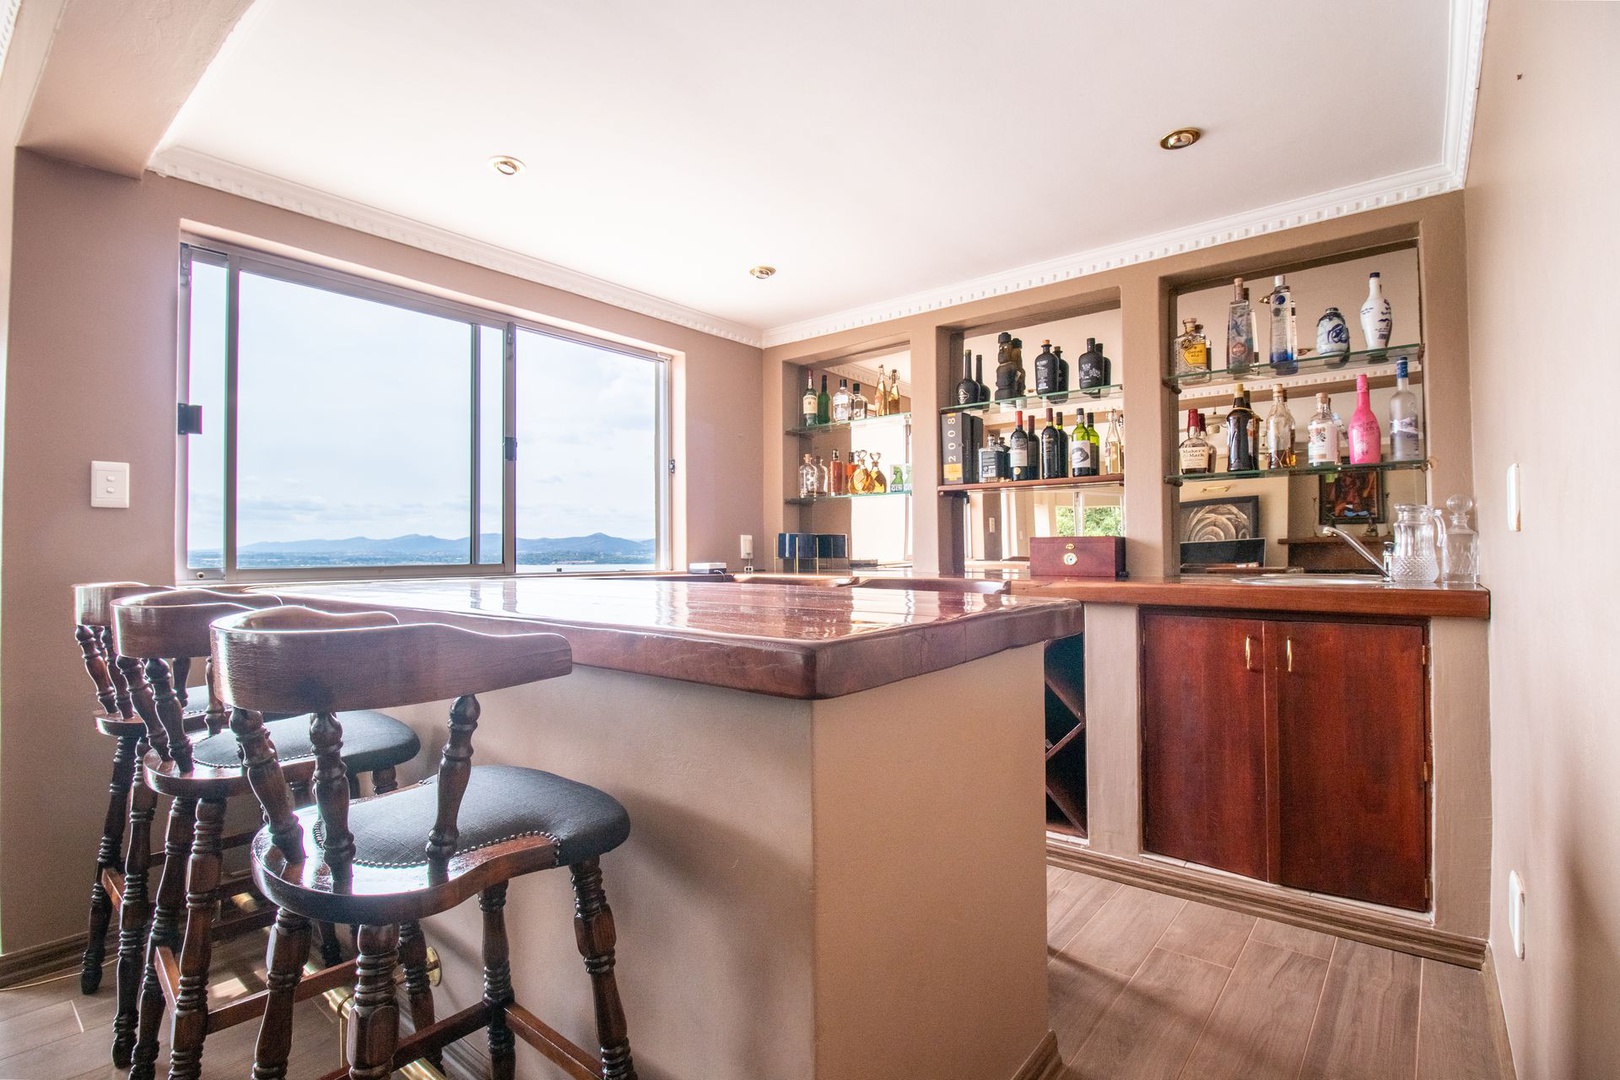 House in Kosmos - Built-in bar is beautifully finished and has views towards the dam